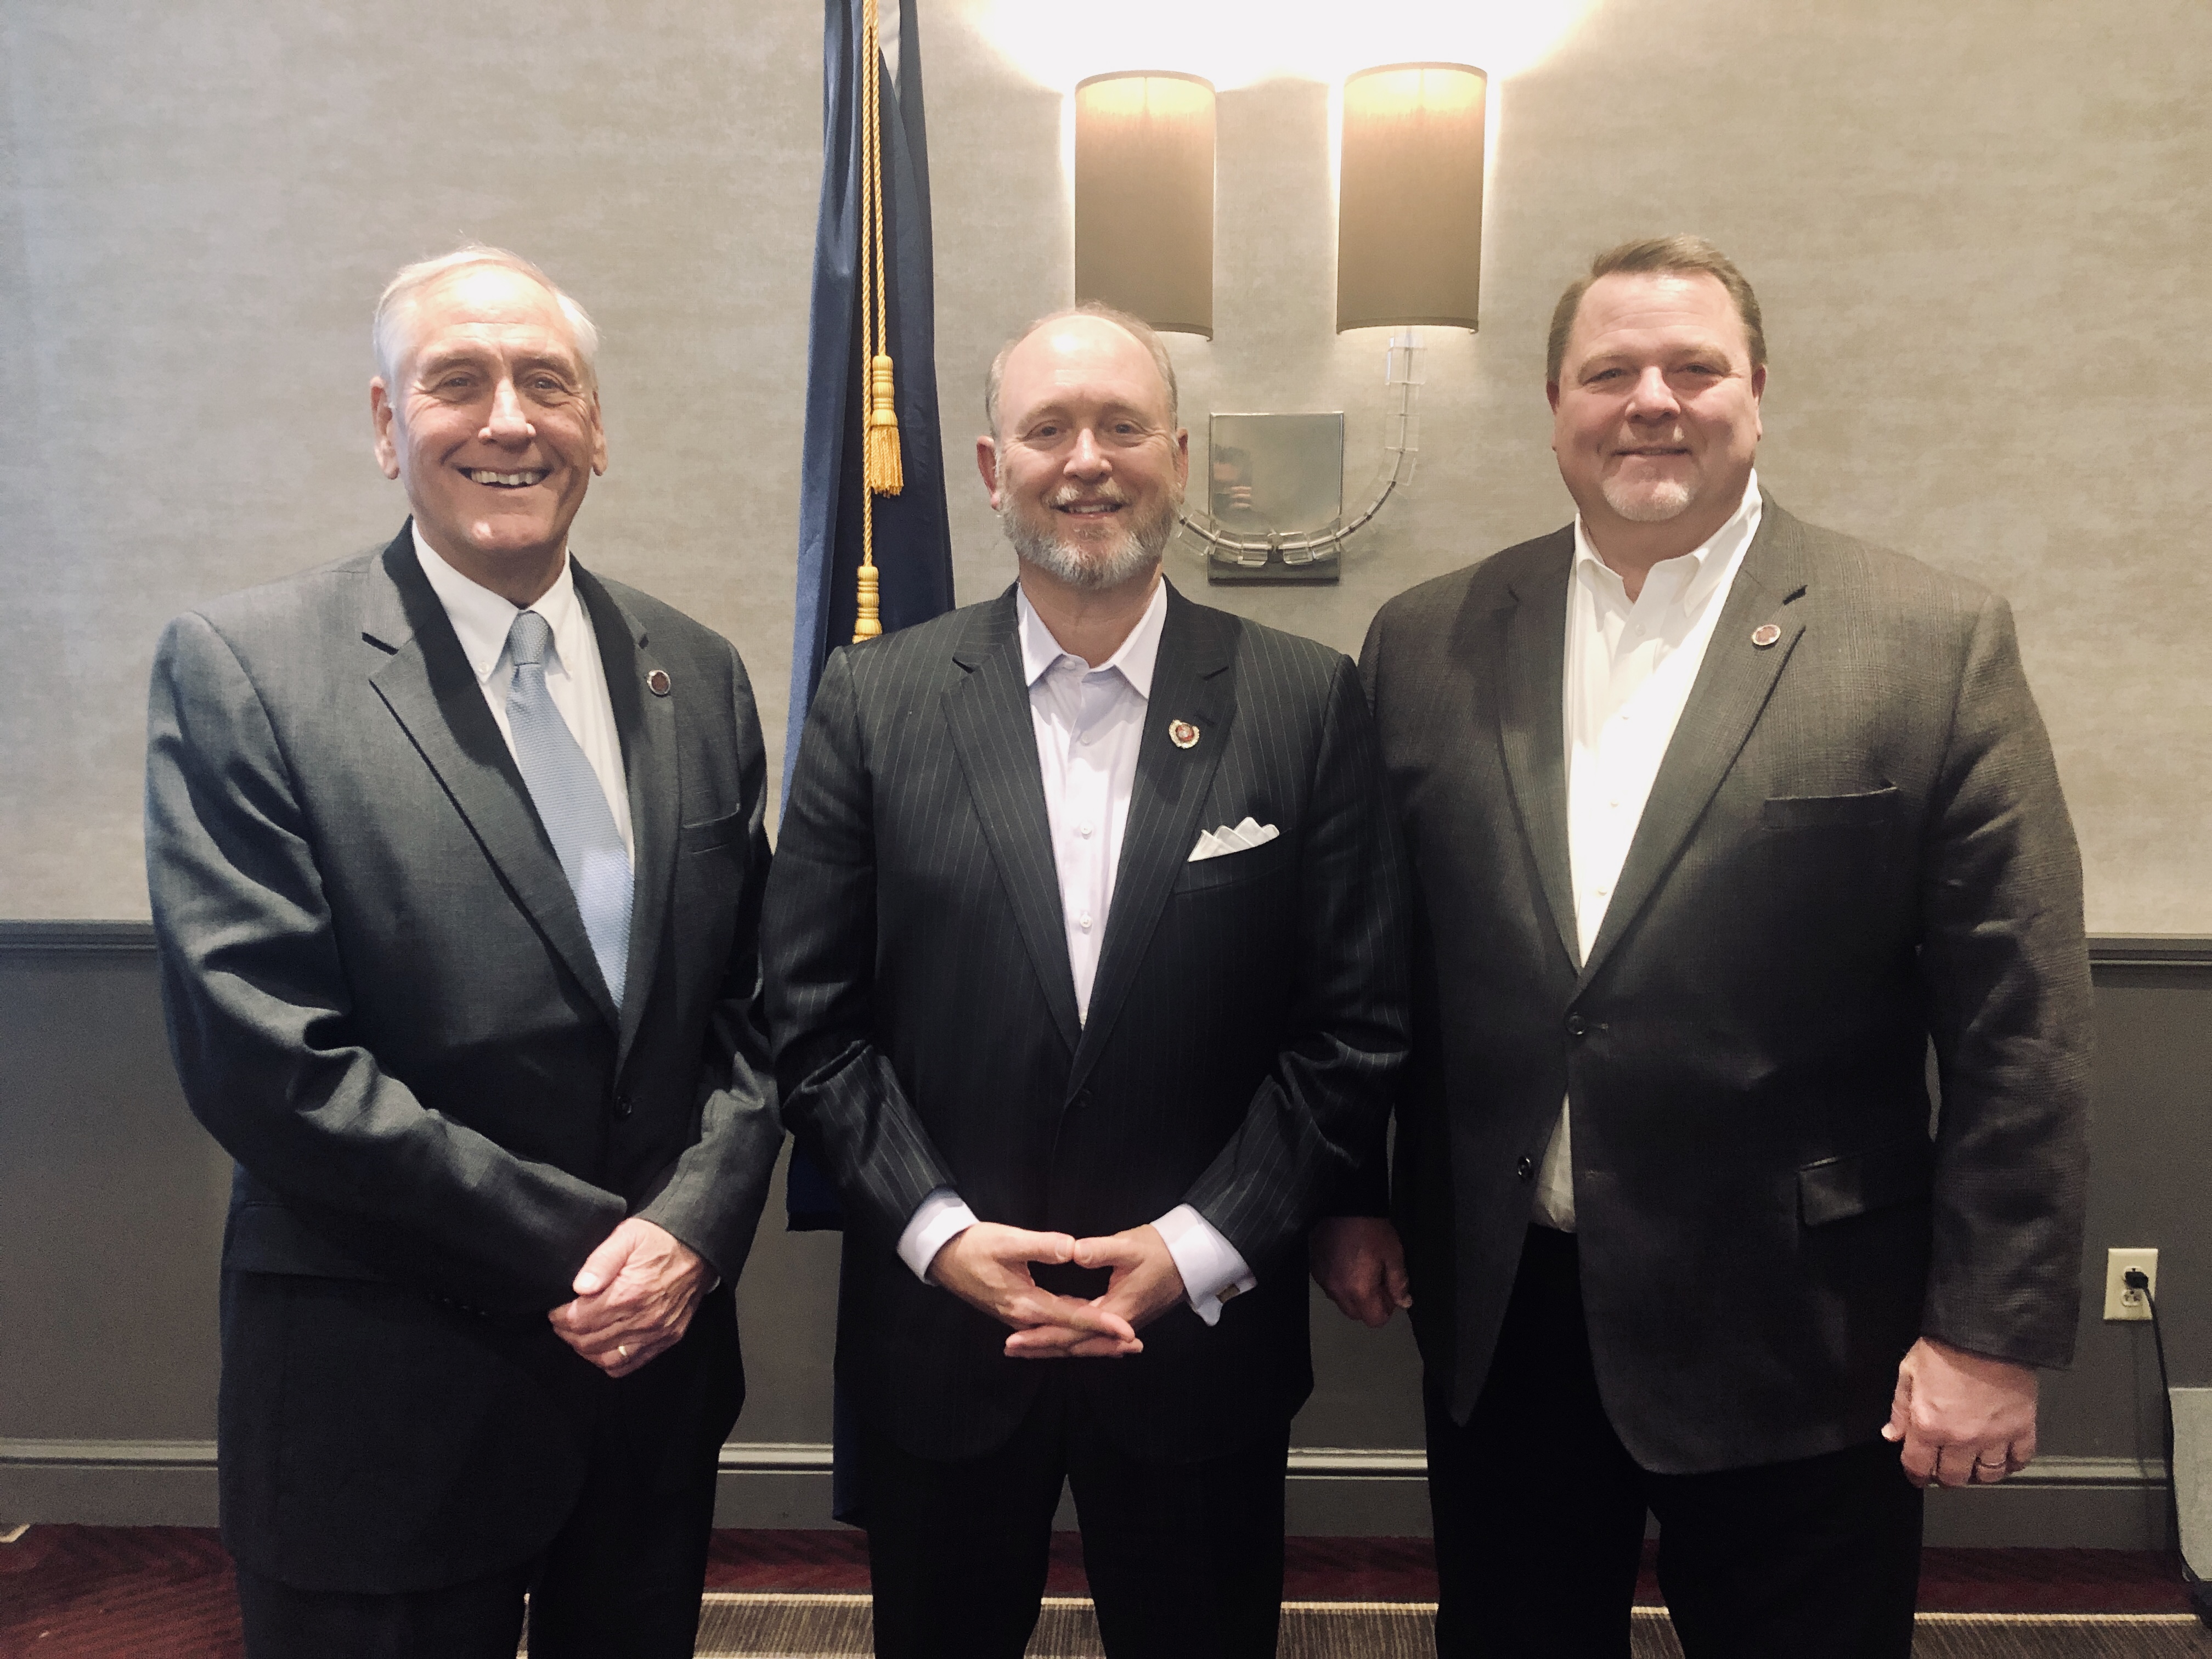 (R-L): Retiring Virginia Senator and Chair of the Transportation Committee Charles W. “Bill” Carrico Sr. (also our Senior Field Rep for Southwest Virginia), VADA President &amp; CEO Don Hall, and incoming Senate Transportation Chair David W. Marsden at today’s VADA Board of Directors meeting. 